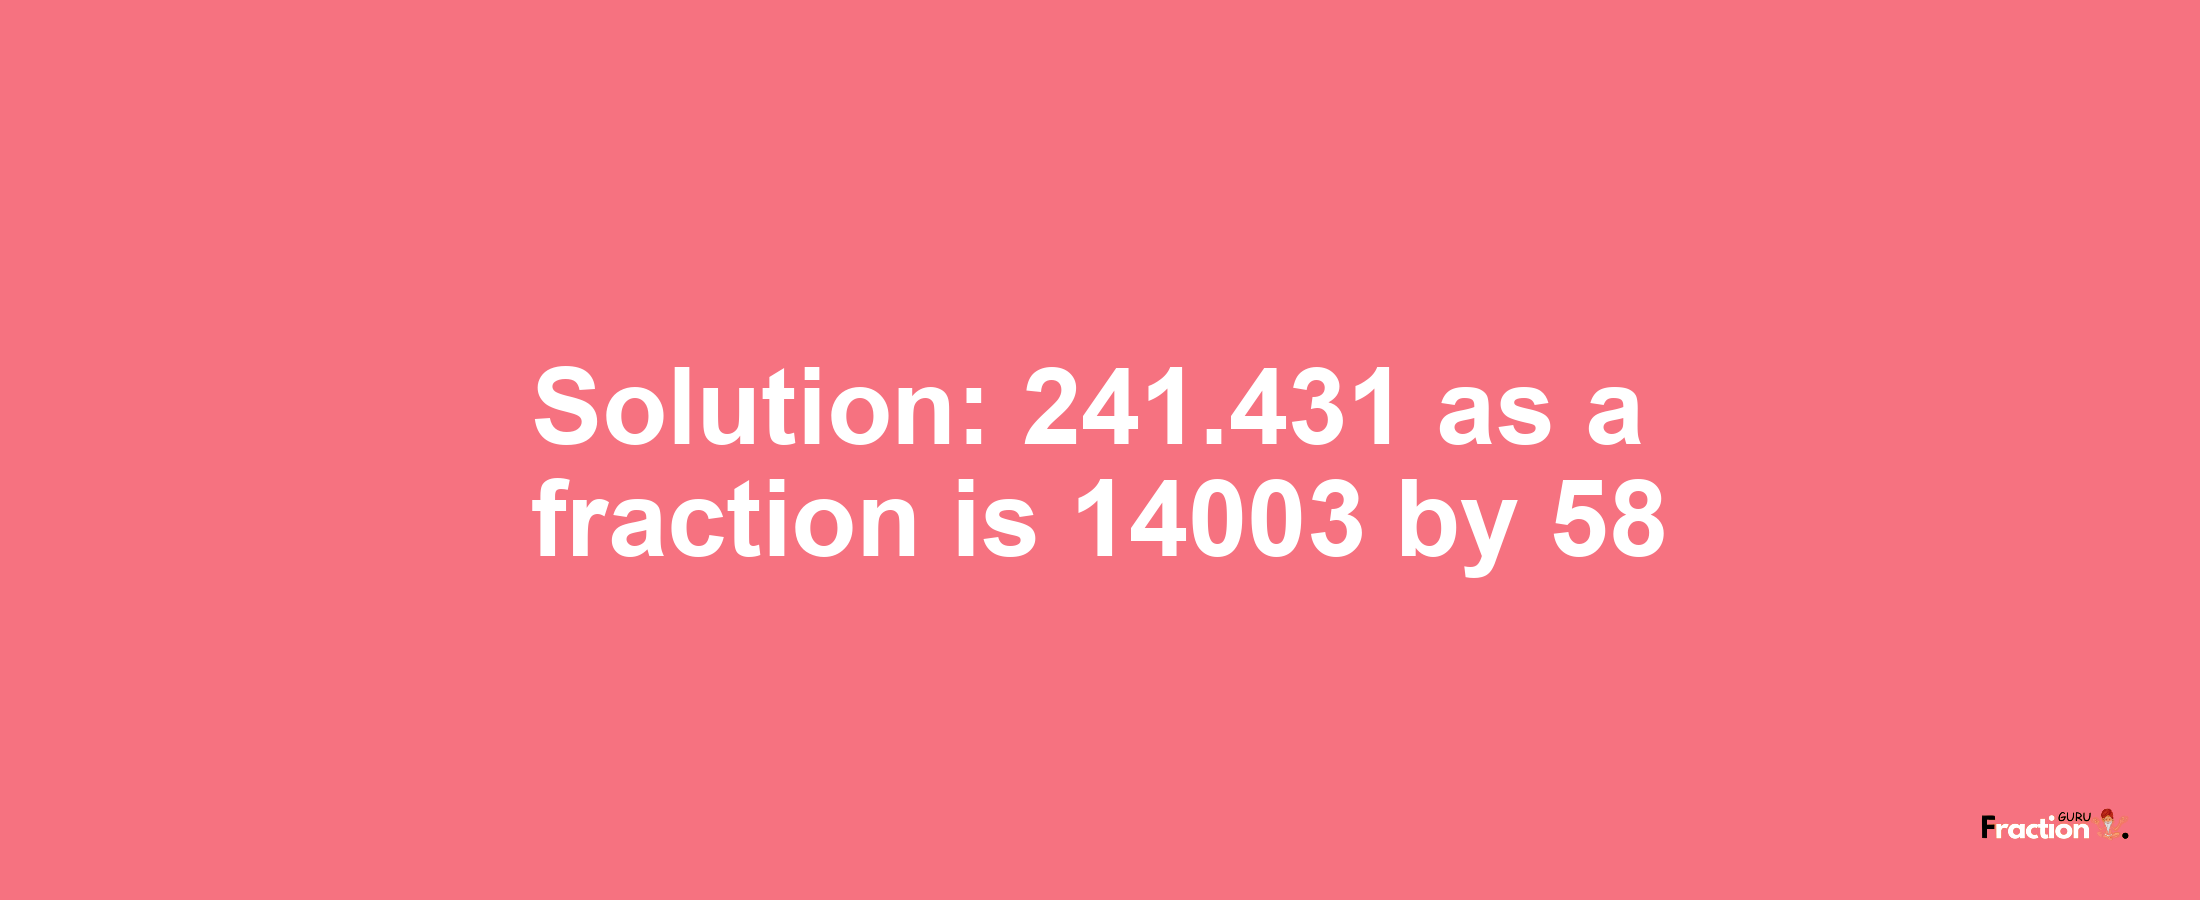 Solution:241.431 as a fraction is 14003/58